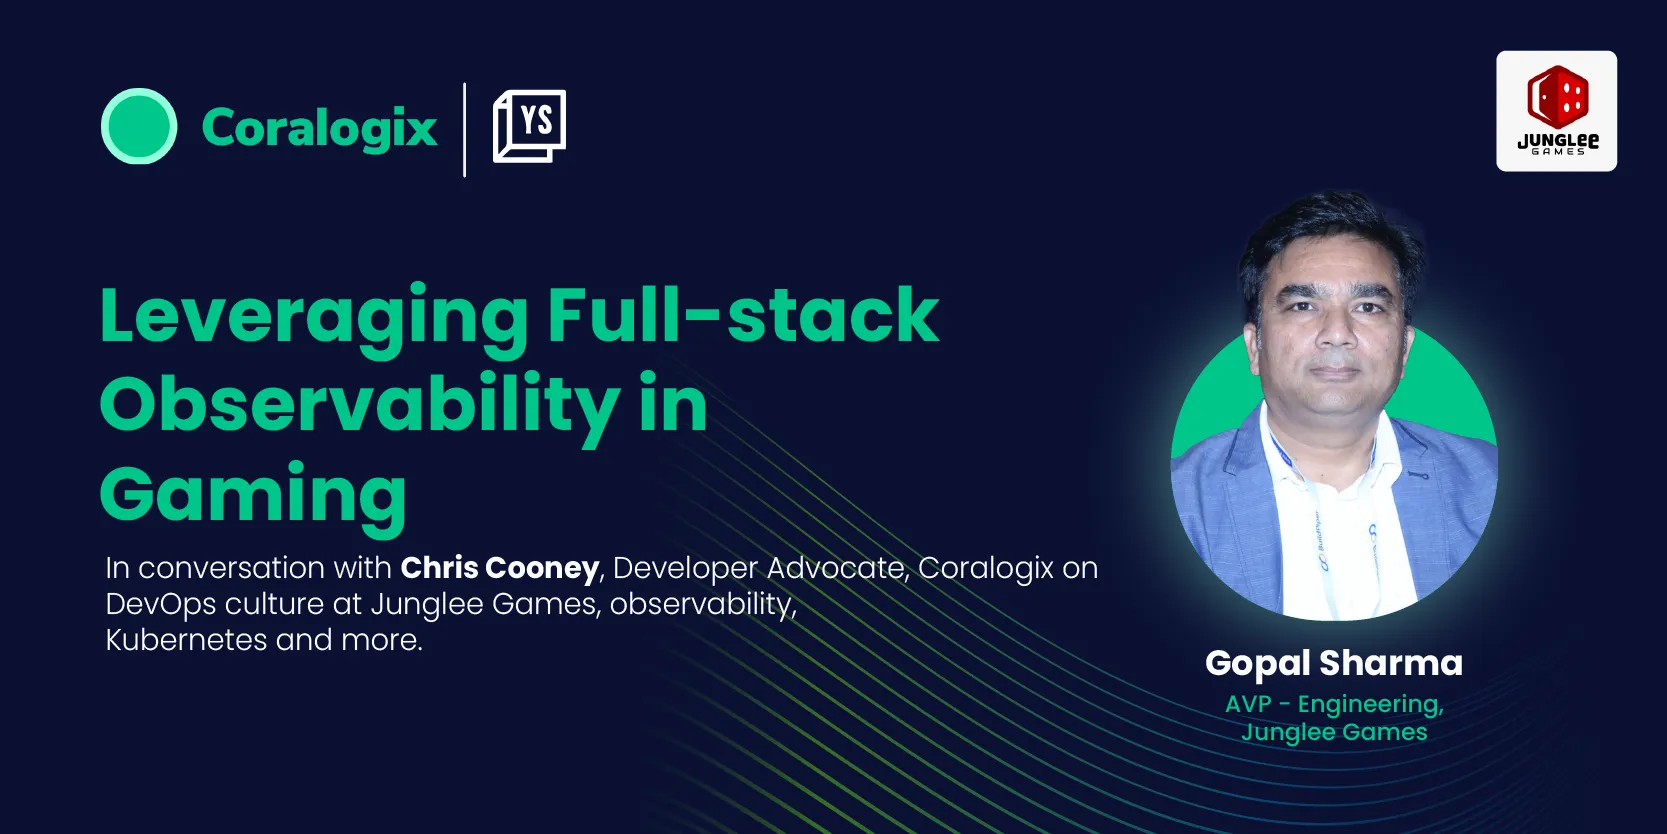 Leveraging Full-stack Observability in Gaming